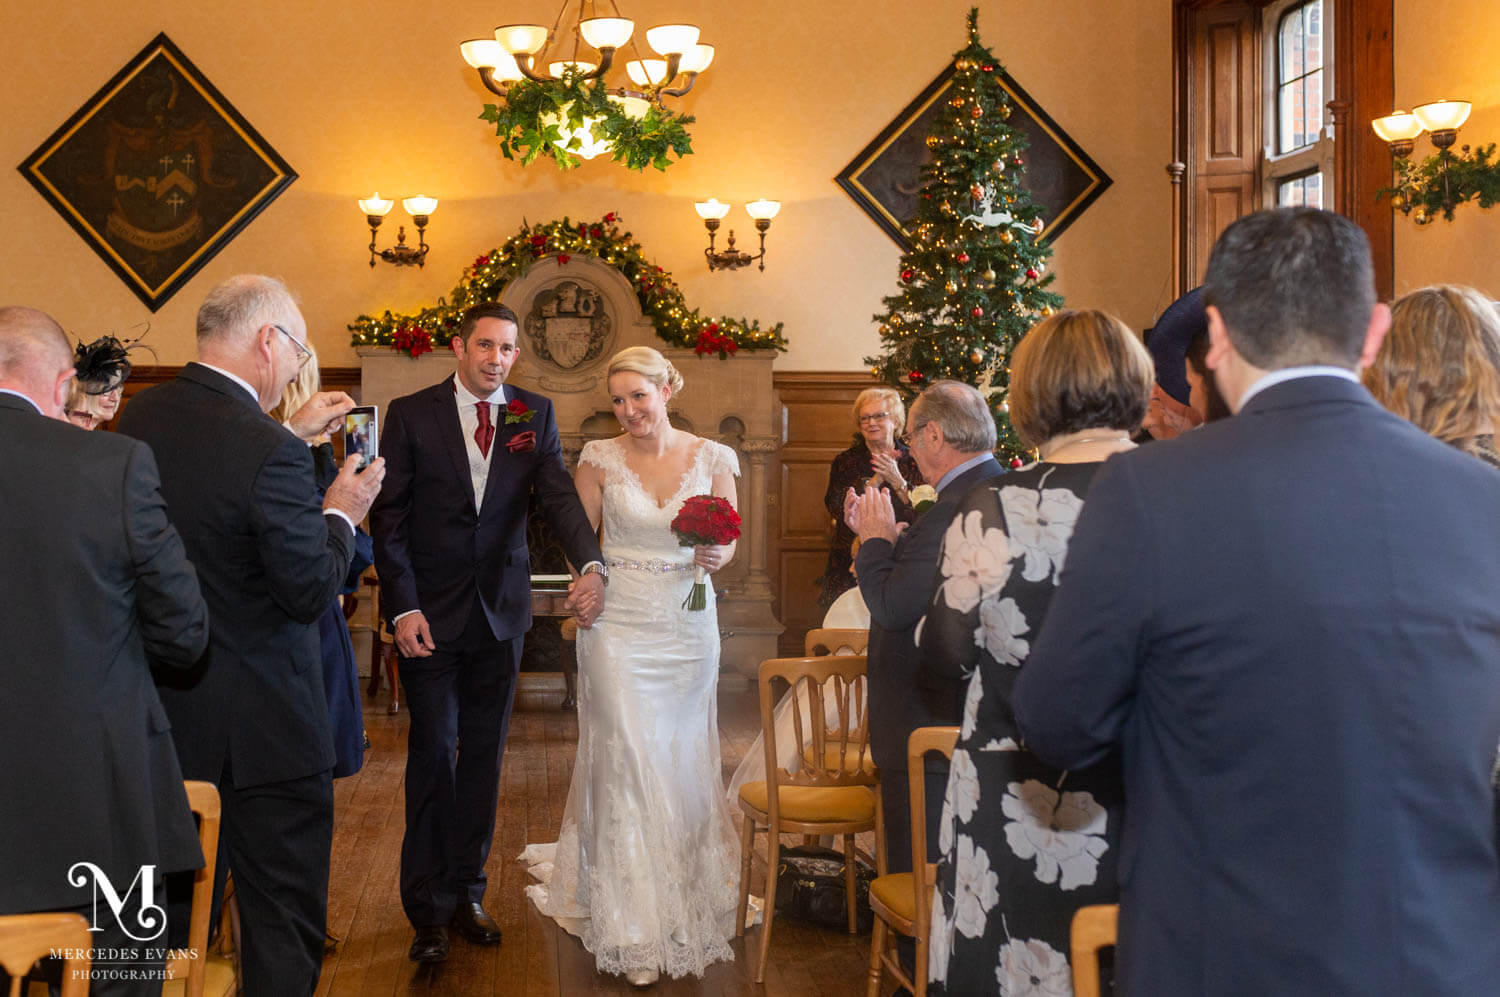 The newly married couple walk back down the aisle after their wedding ceremony in the Oak Room at the Elvetham